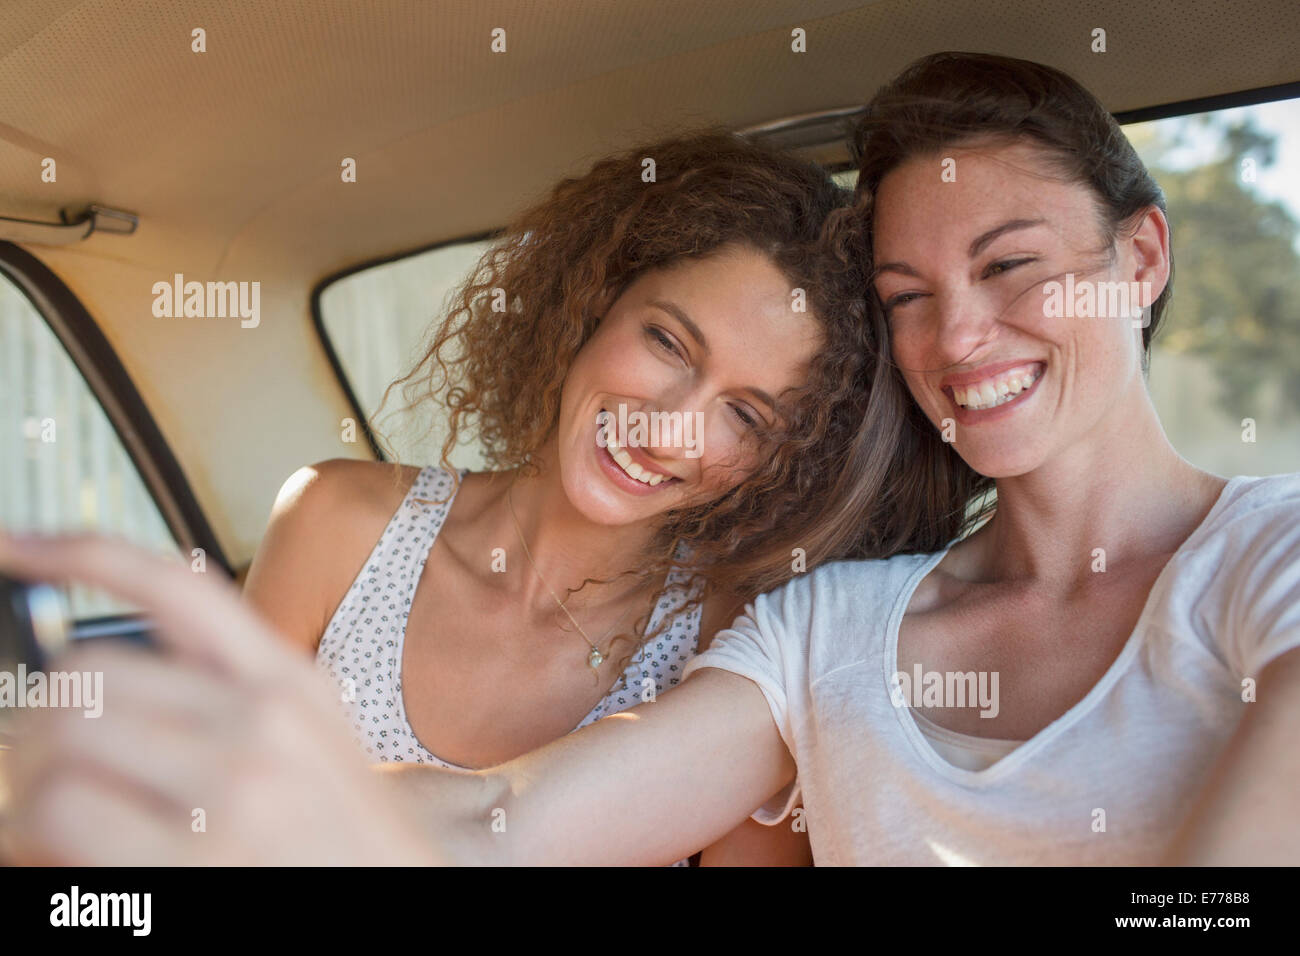 Sisters taking picture together on cell phone Stock Photo